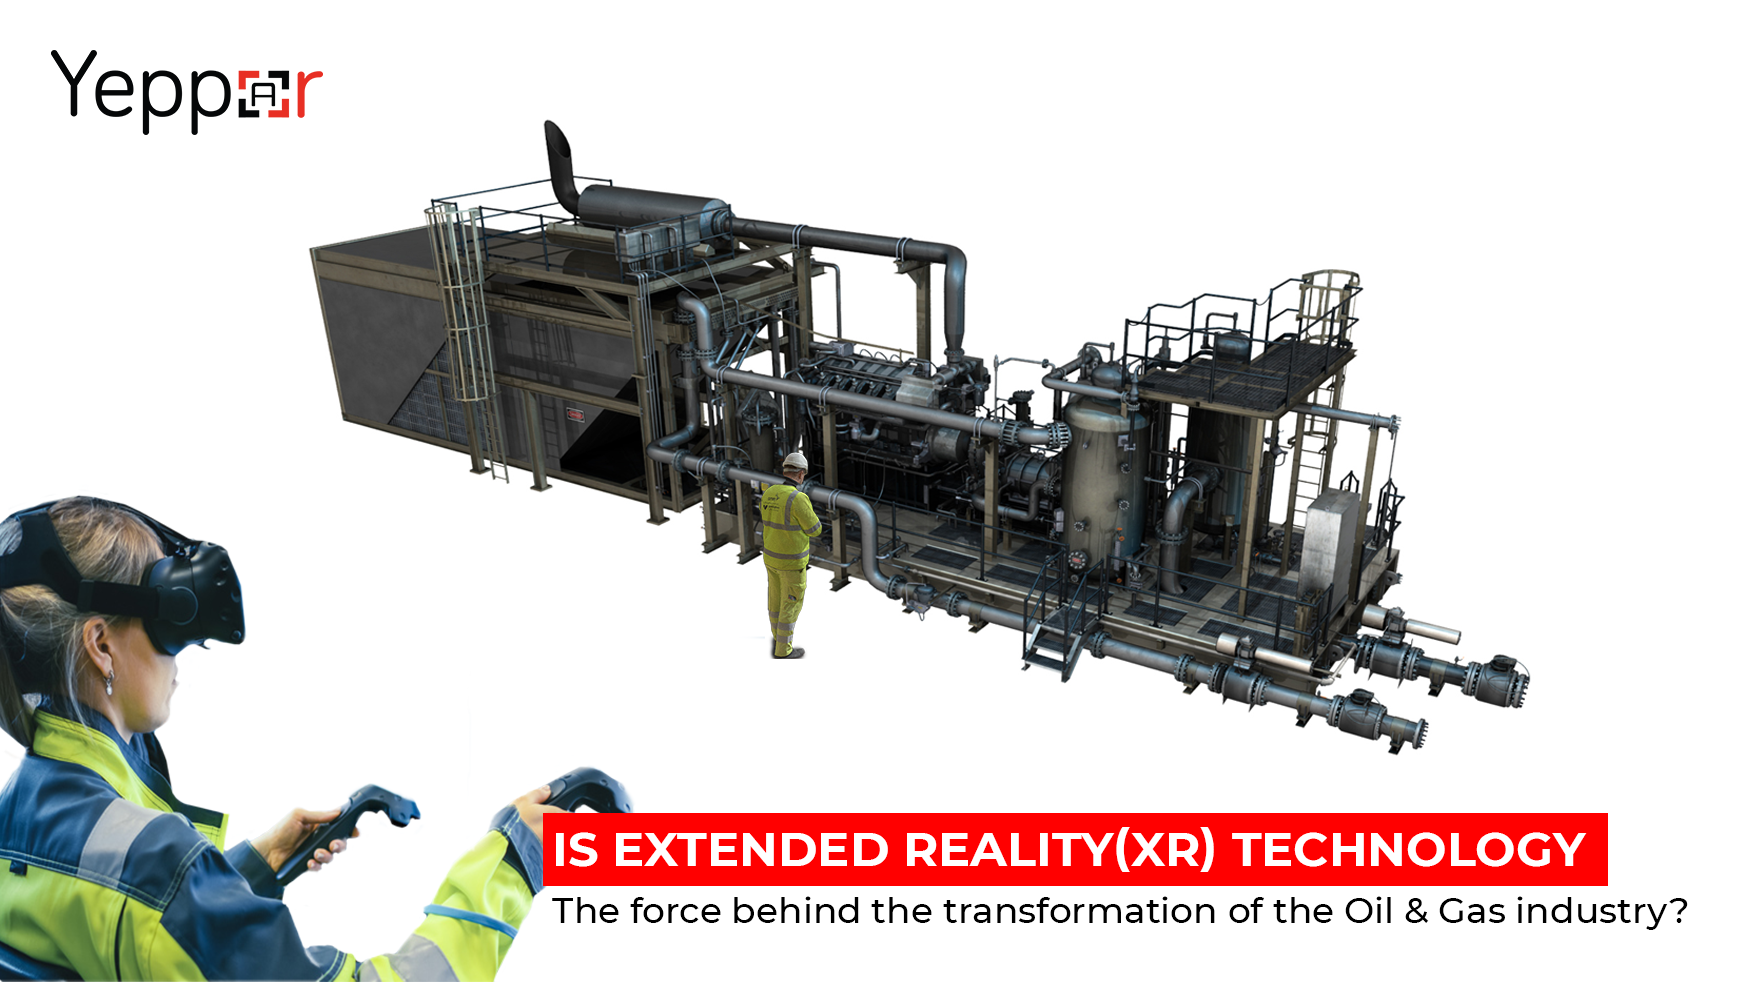 Extended Reality Solutions For Oil & GAS